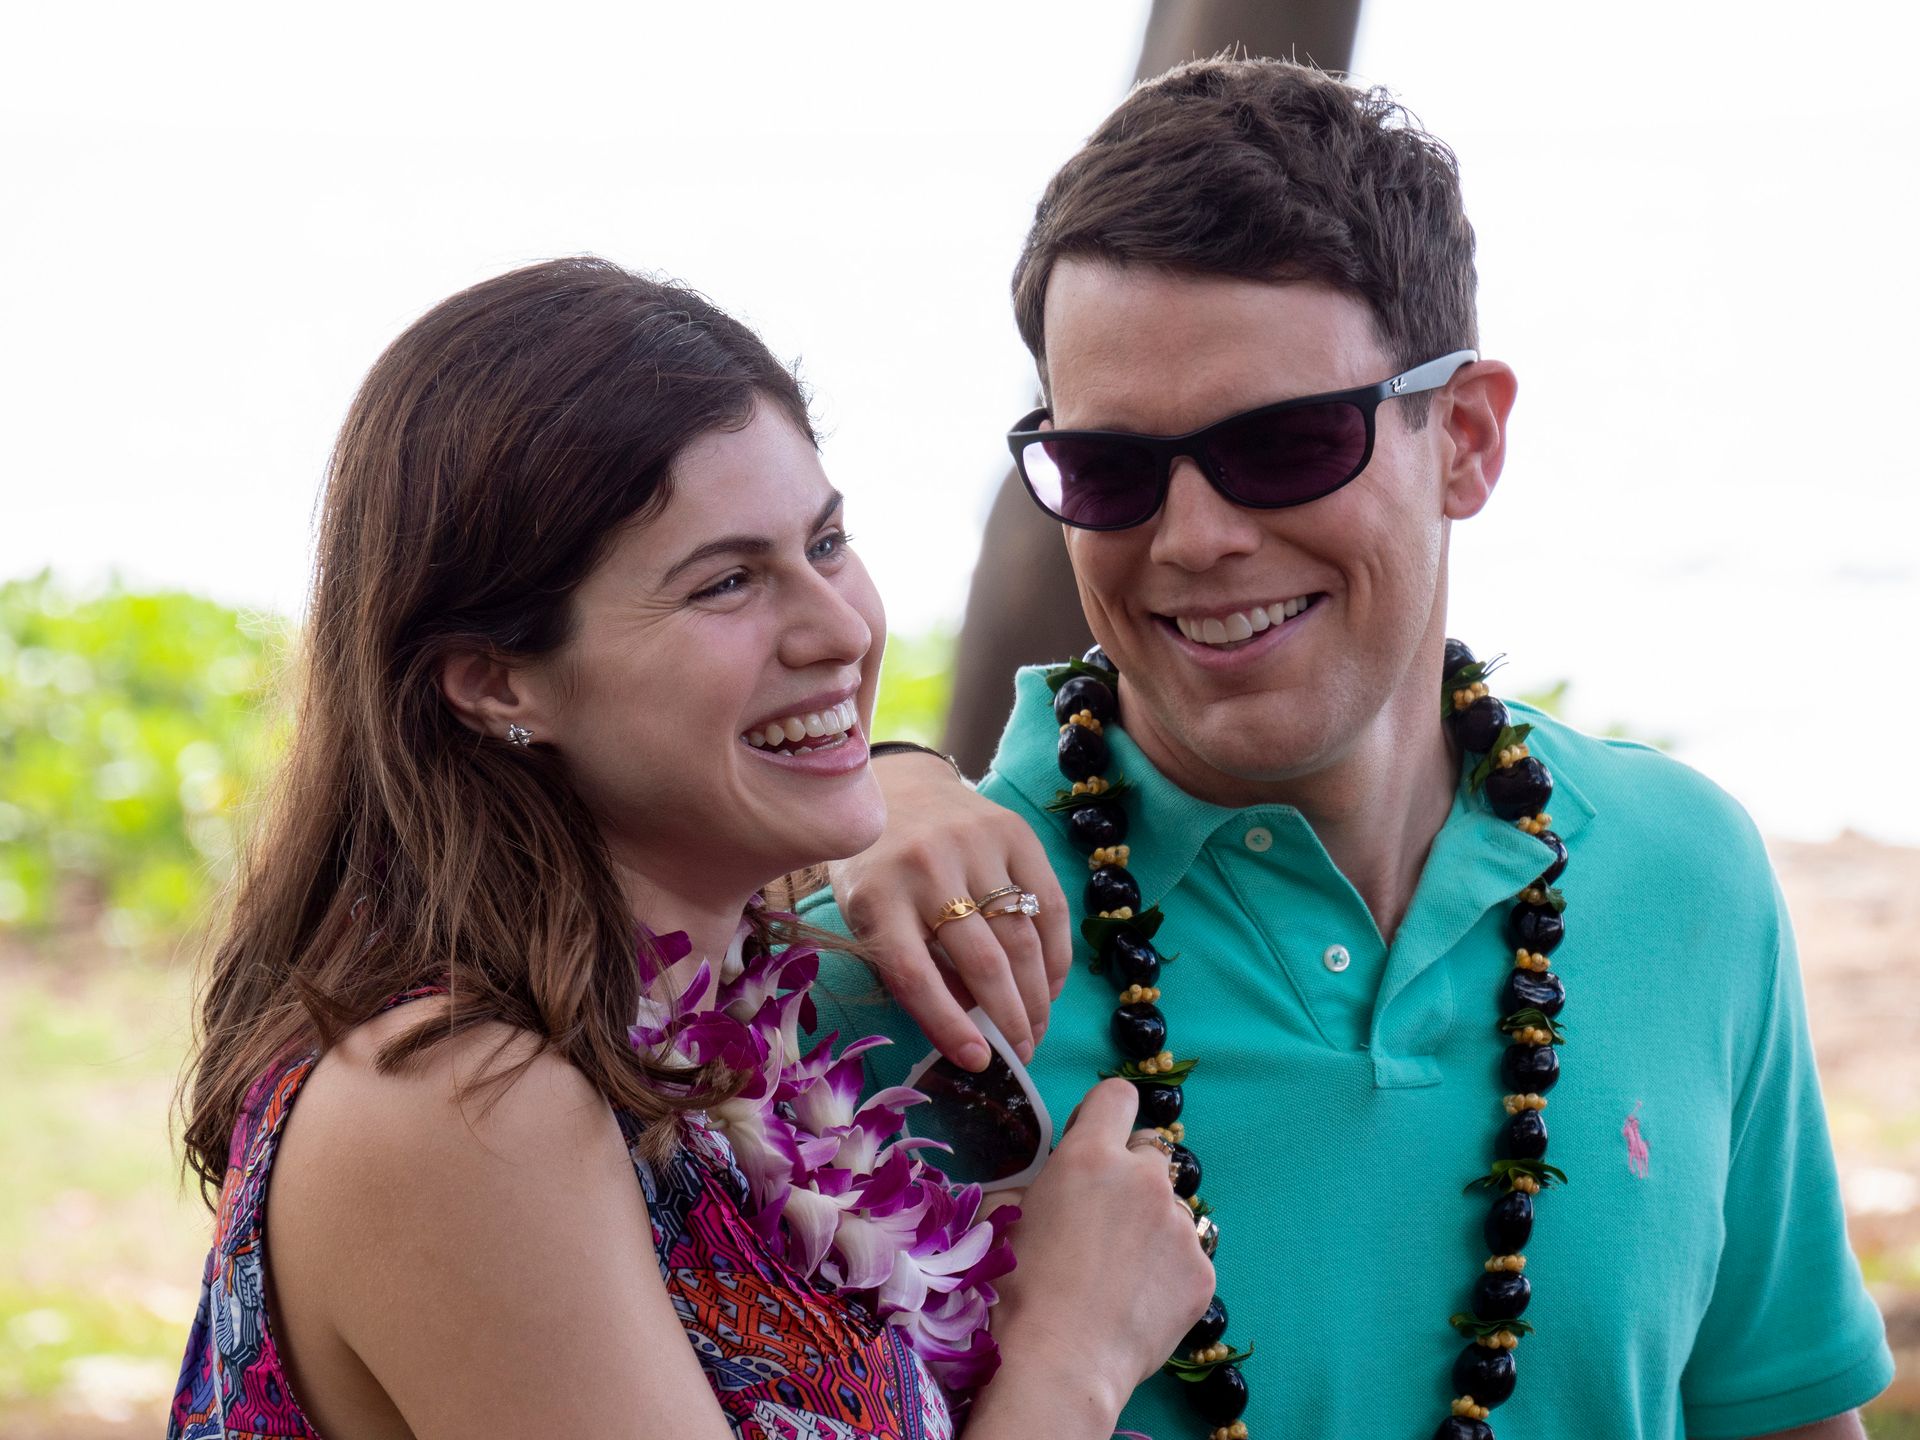 Alexandra Daddario and Jake Lacy in The White Lotus